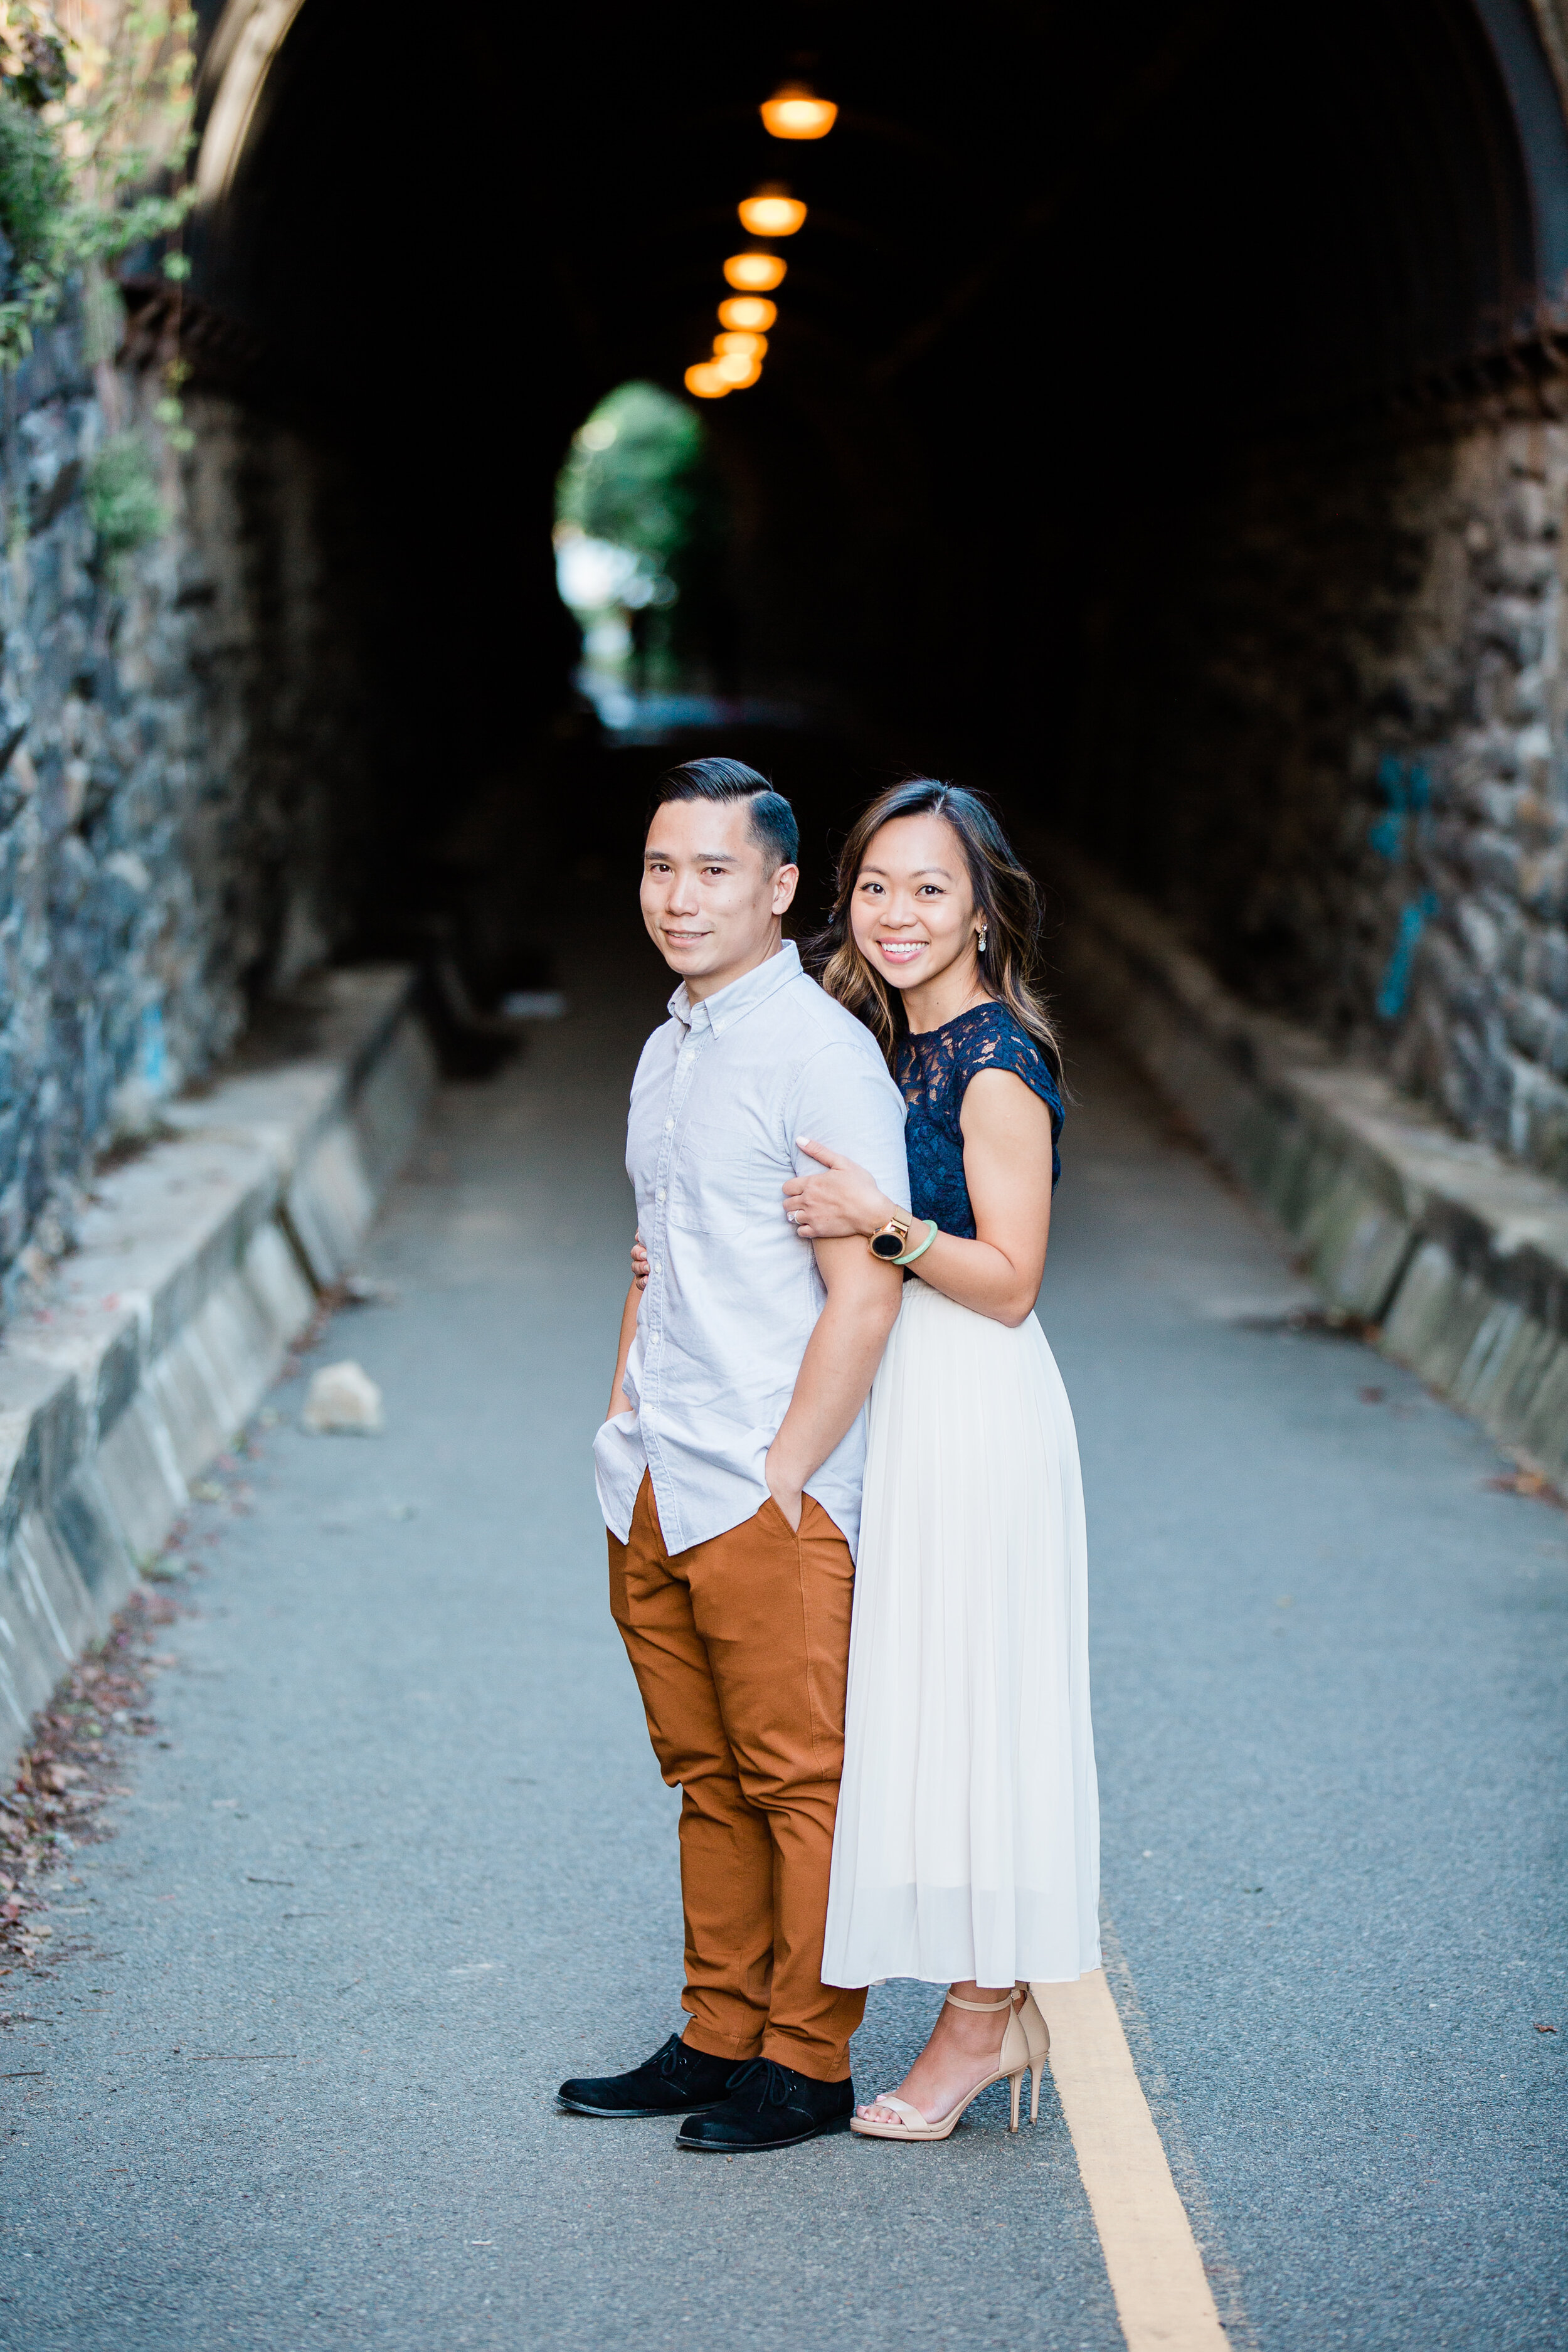 old_town_alexandria_engagements-3945.jpg